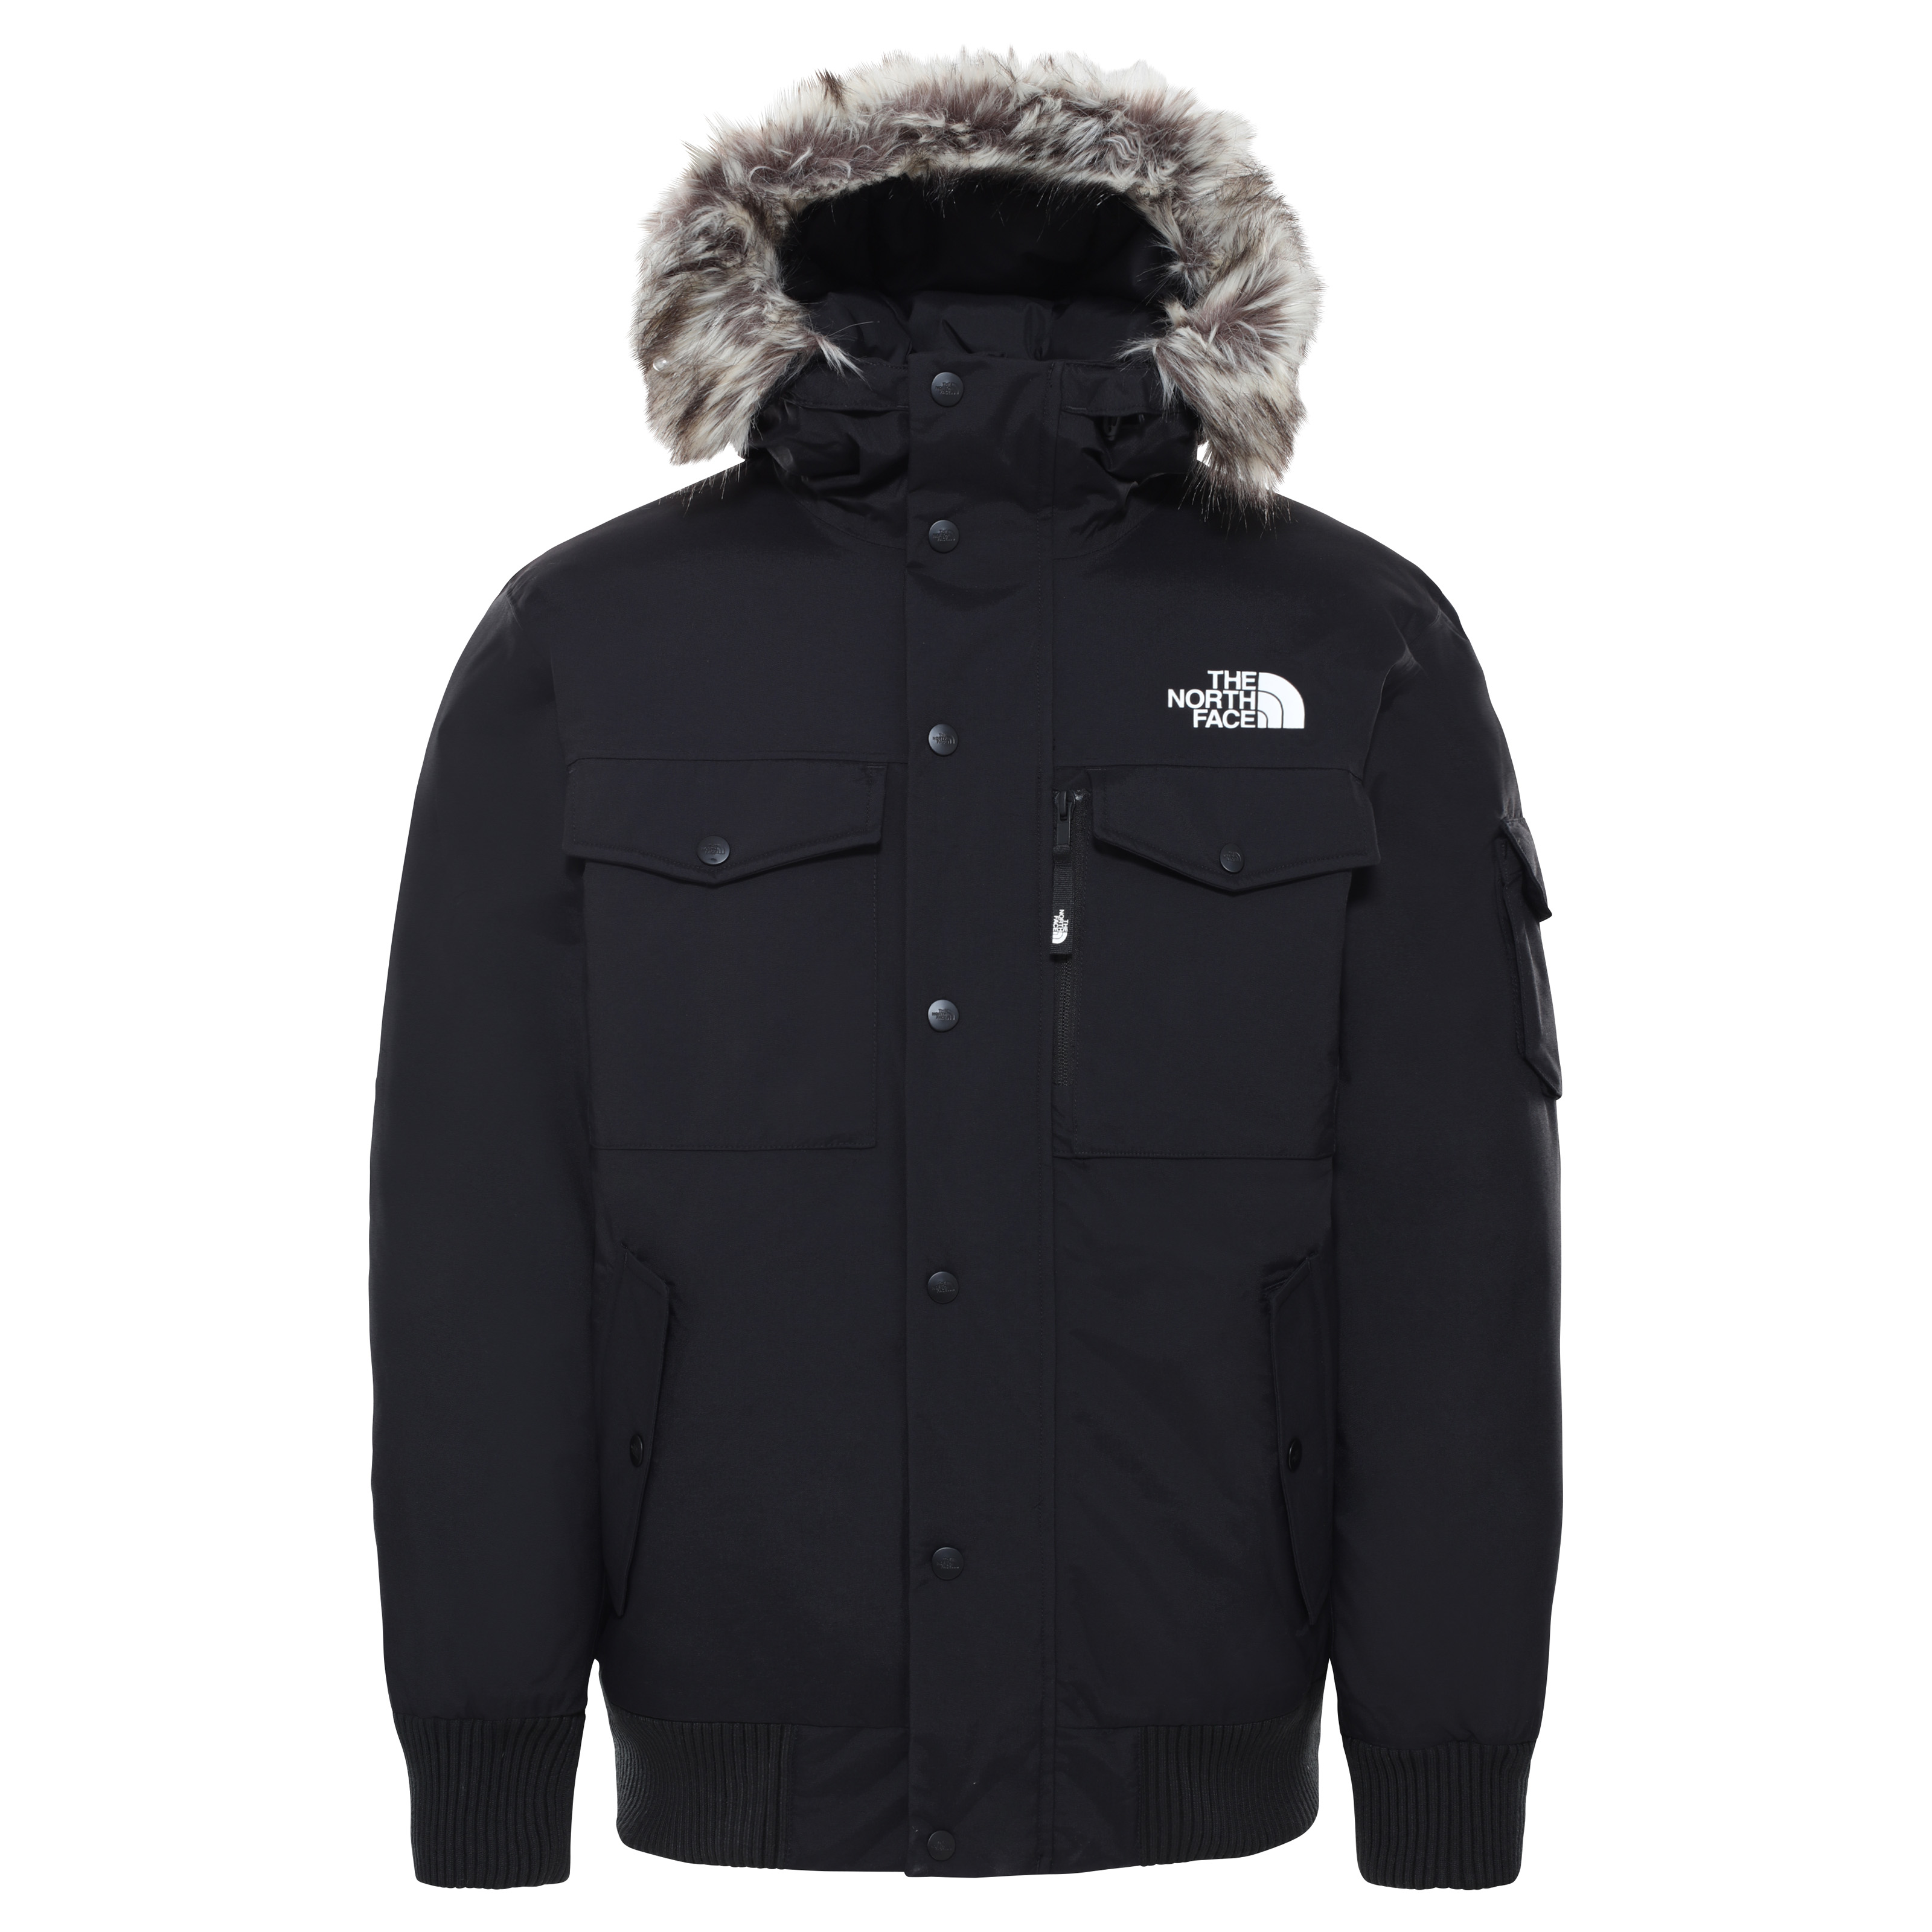 The North Face Men’s Recycled Gotham Jacket Tnf Black